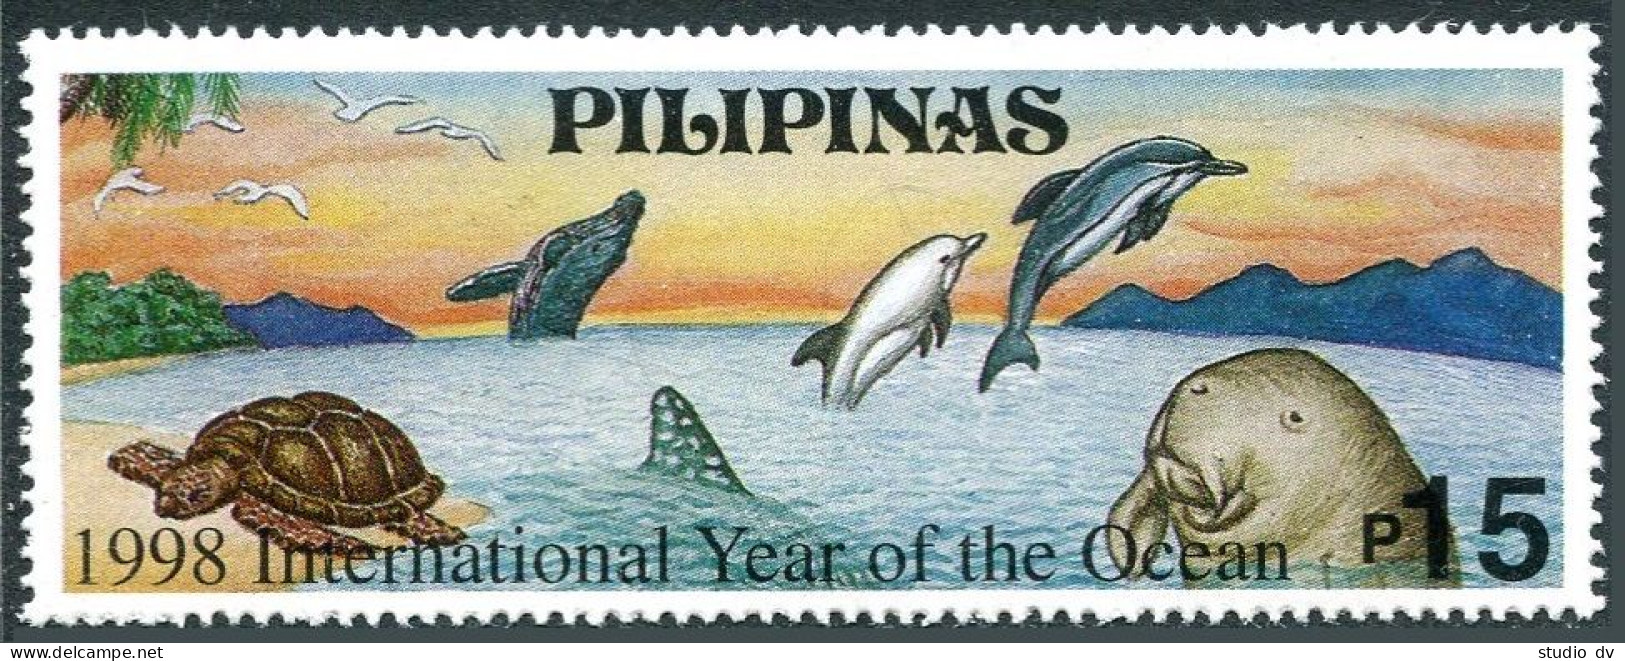 Philippines 2554, MNH. Year Of The Ocean-1998. Seals, Turtle. - Filipinas